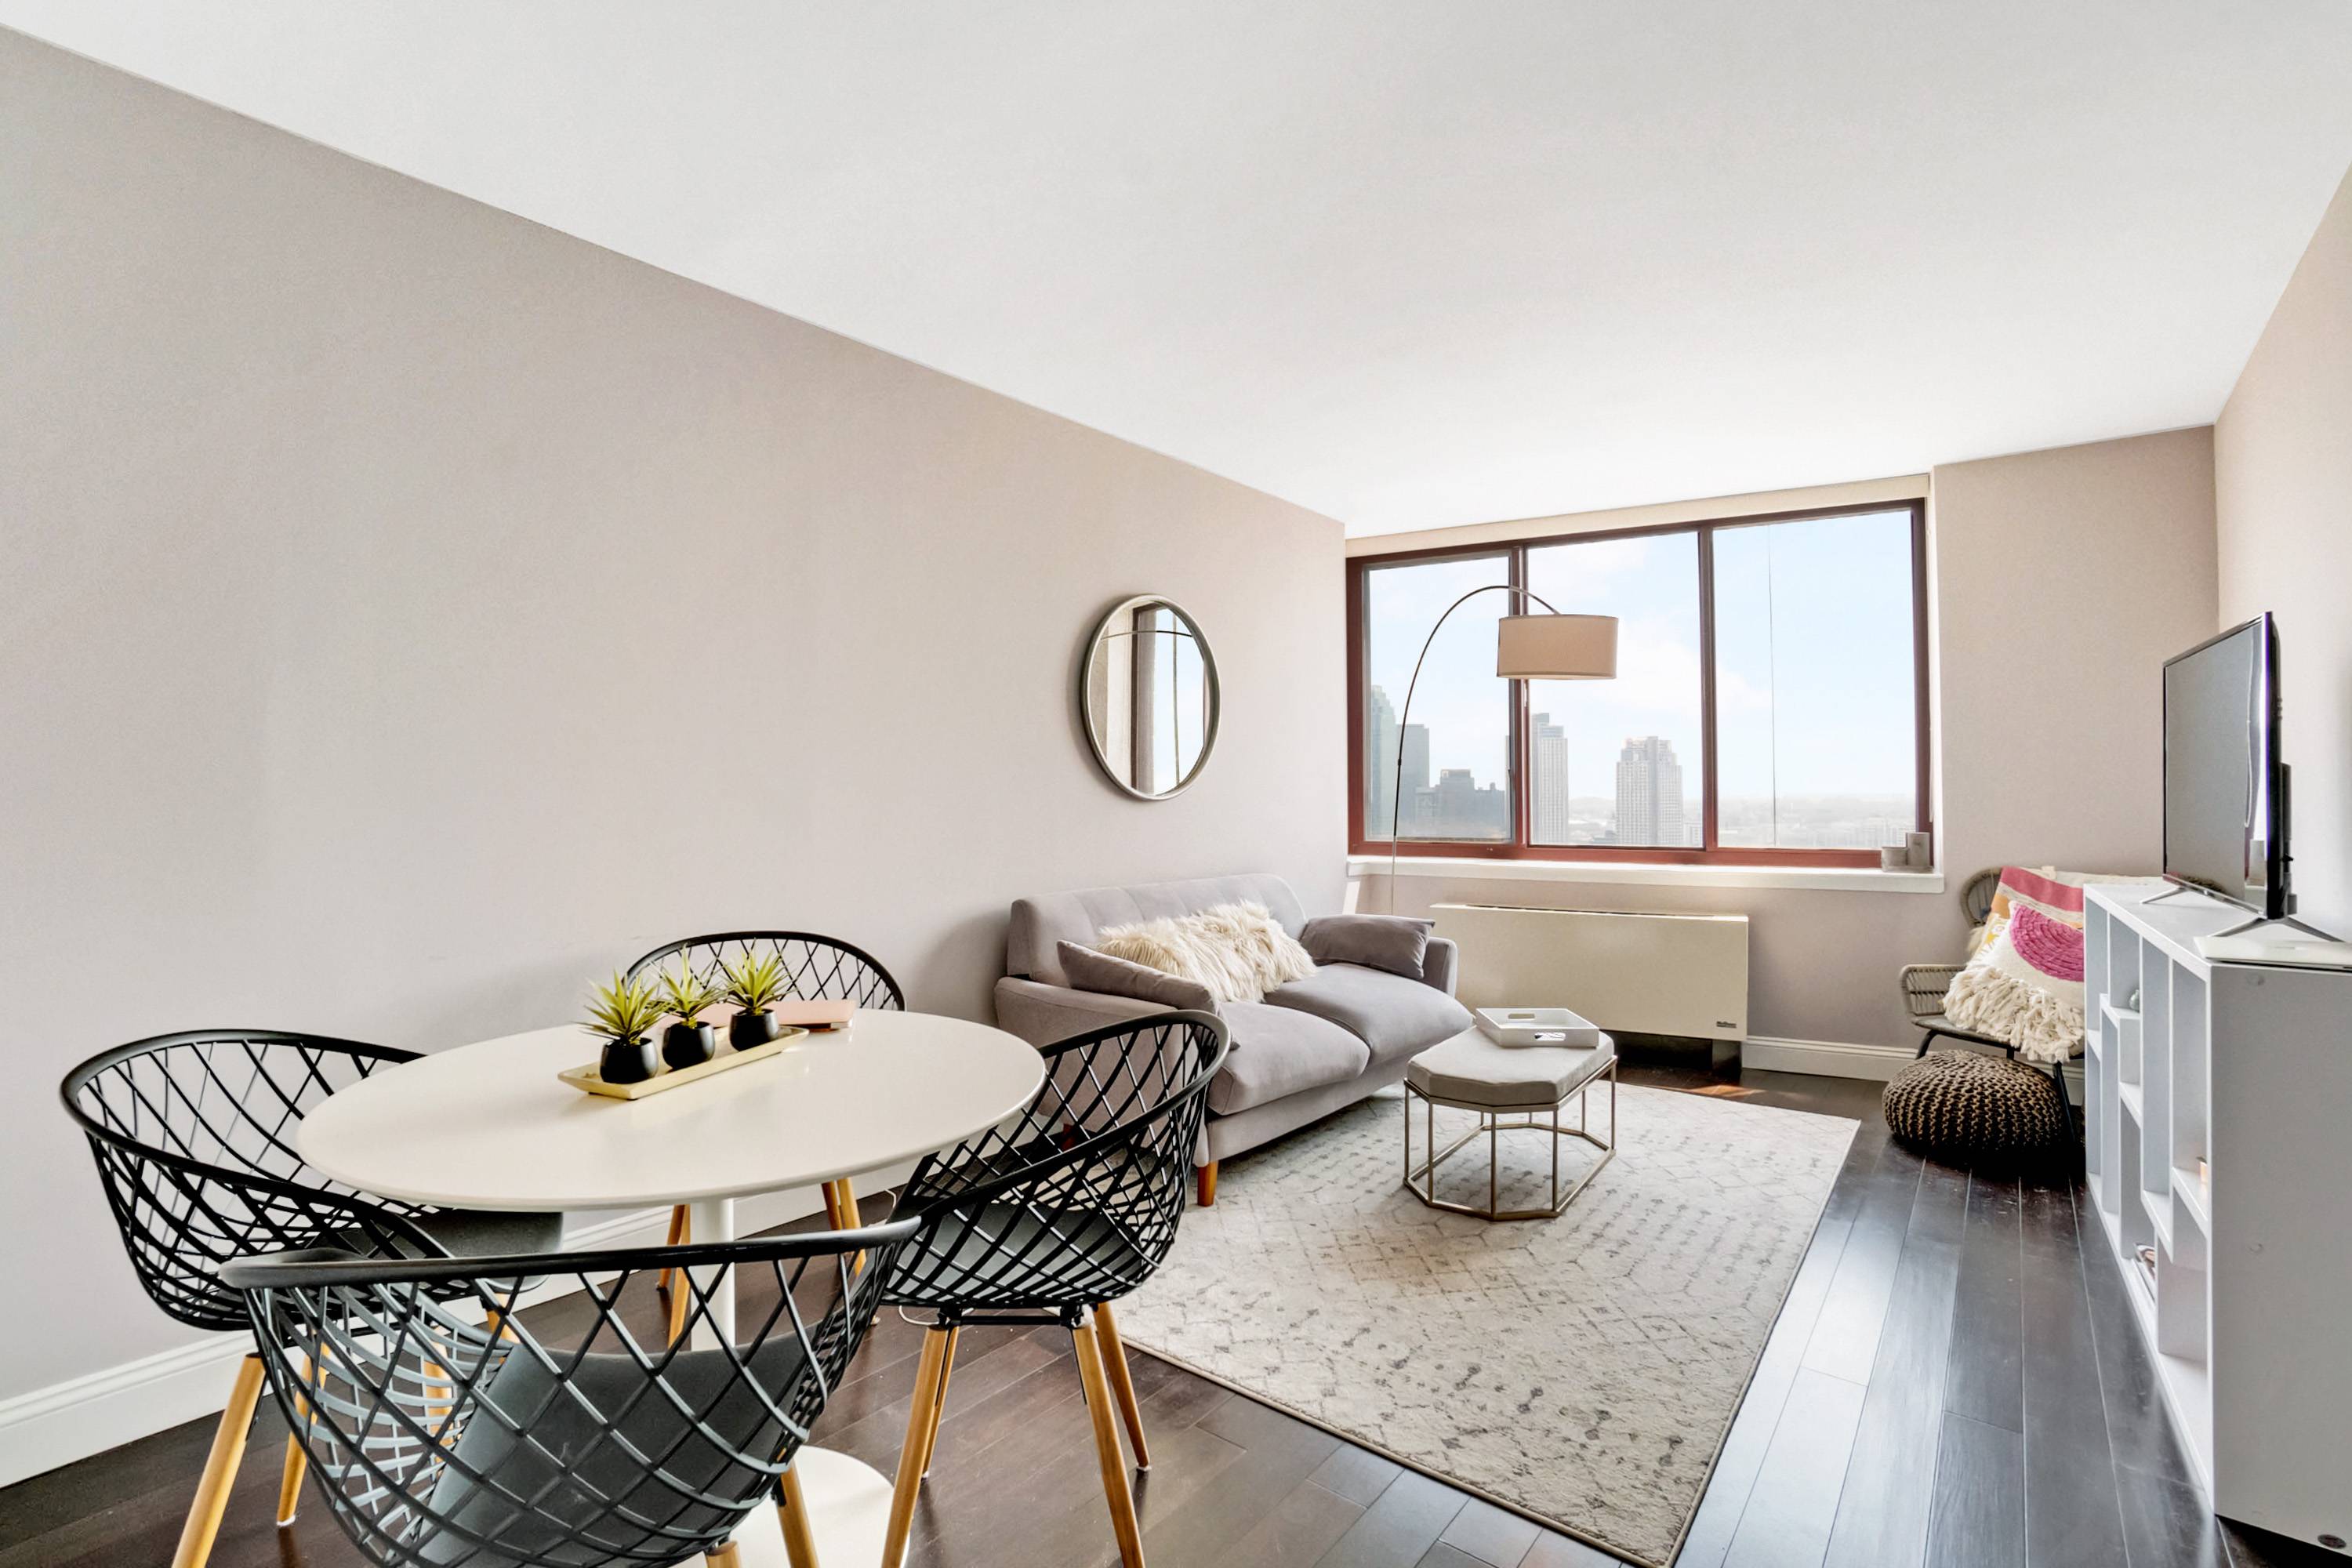 Warm sunlight streams into this east facing large renovated 1 bedroom apartment with views of Queens and the Brooklyn skyline.